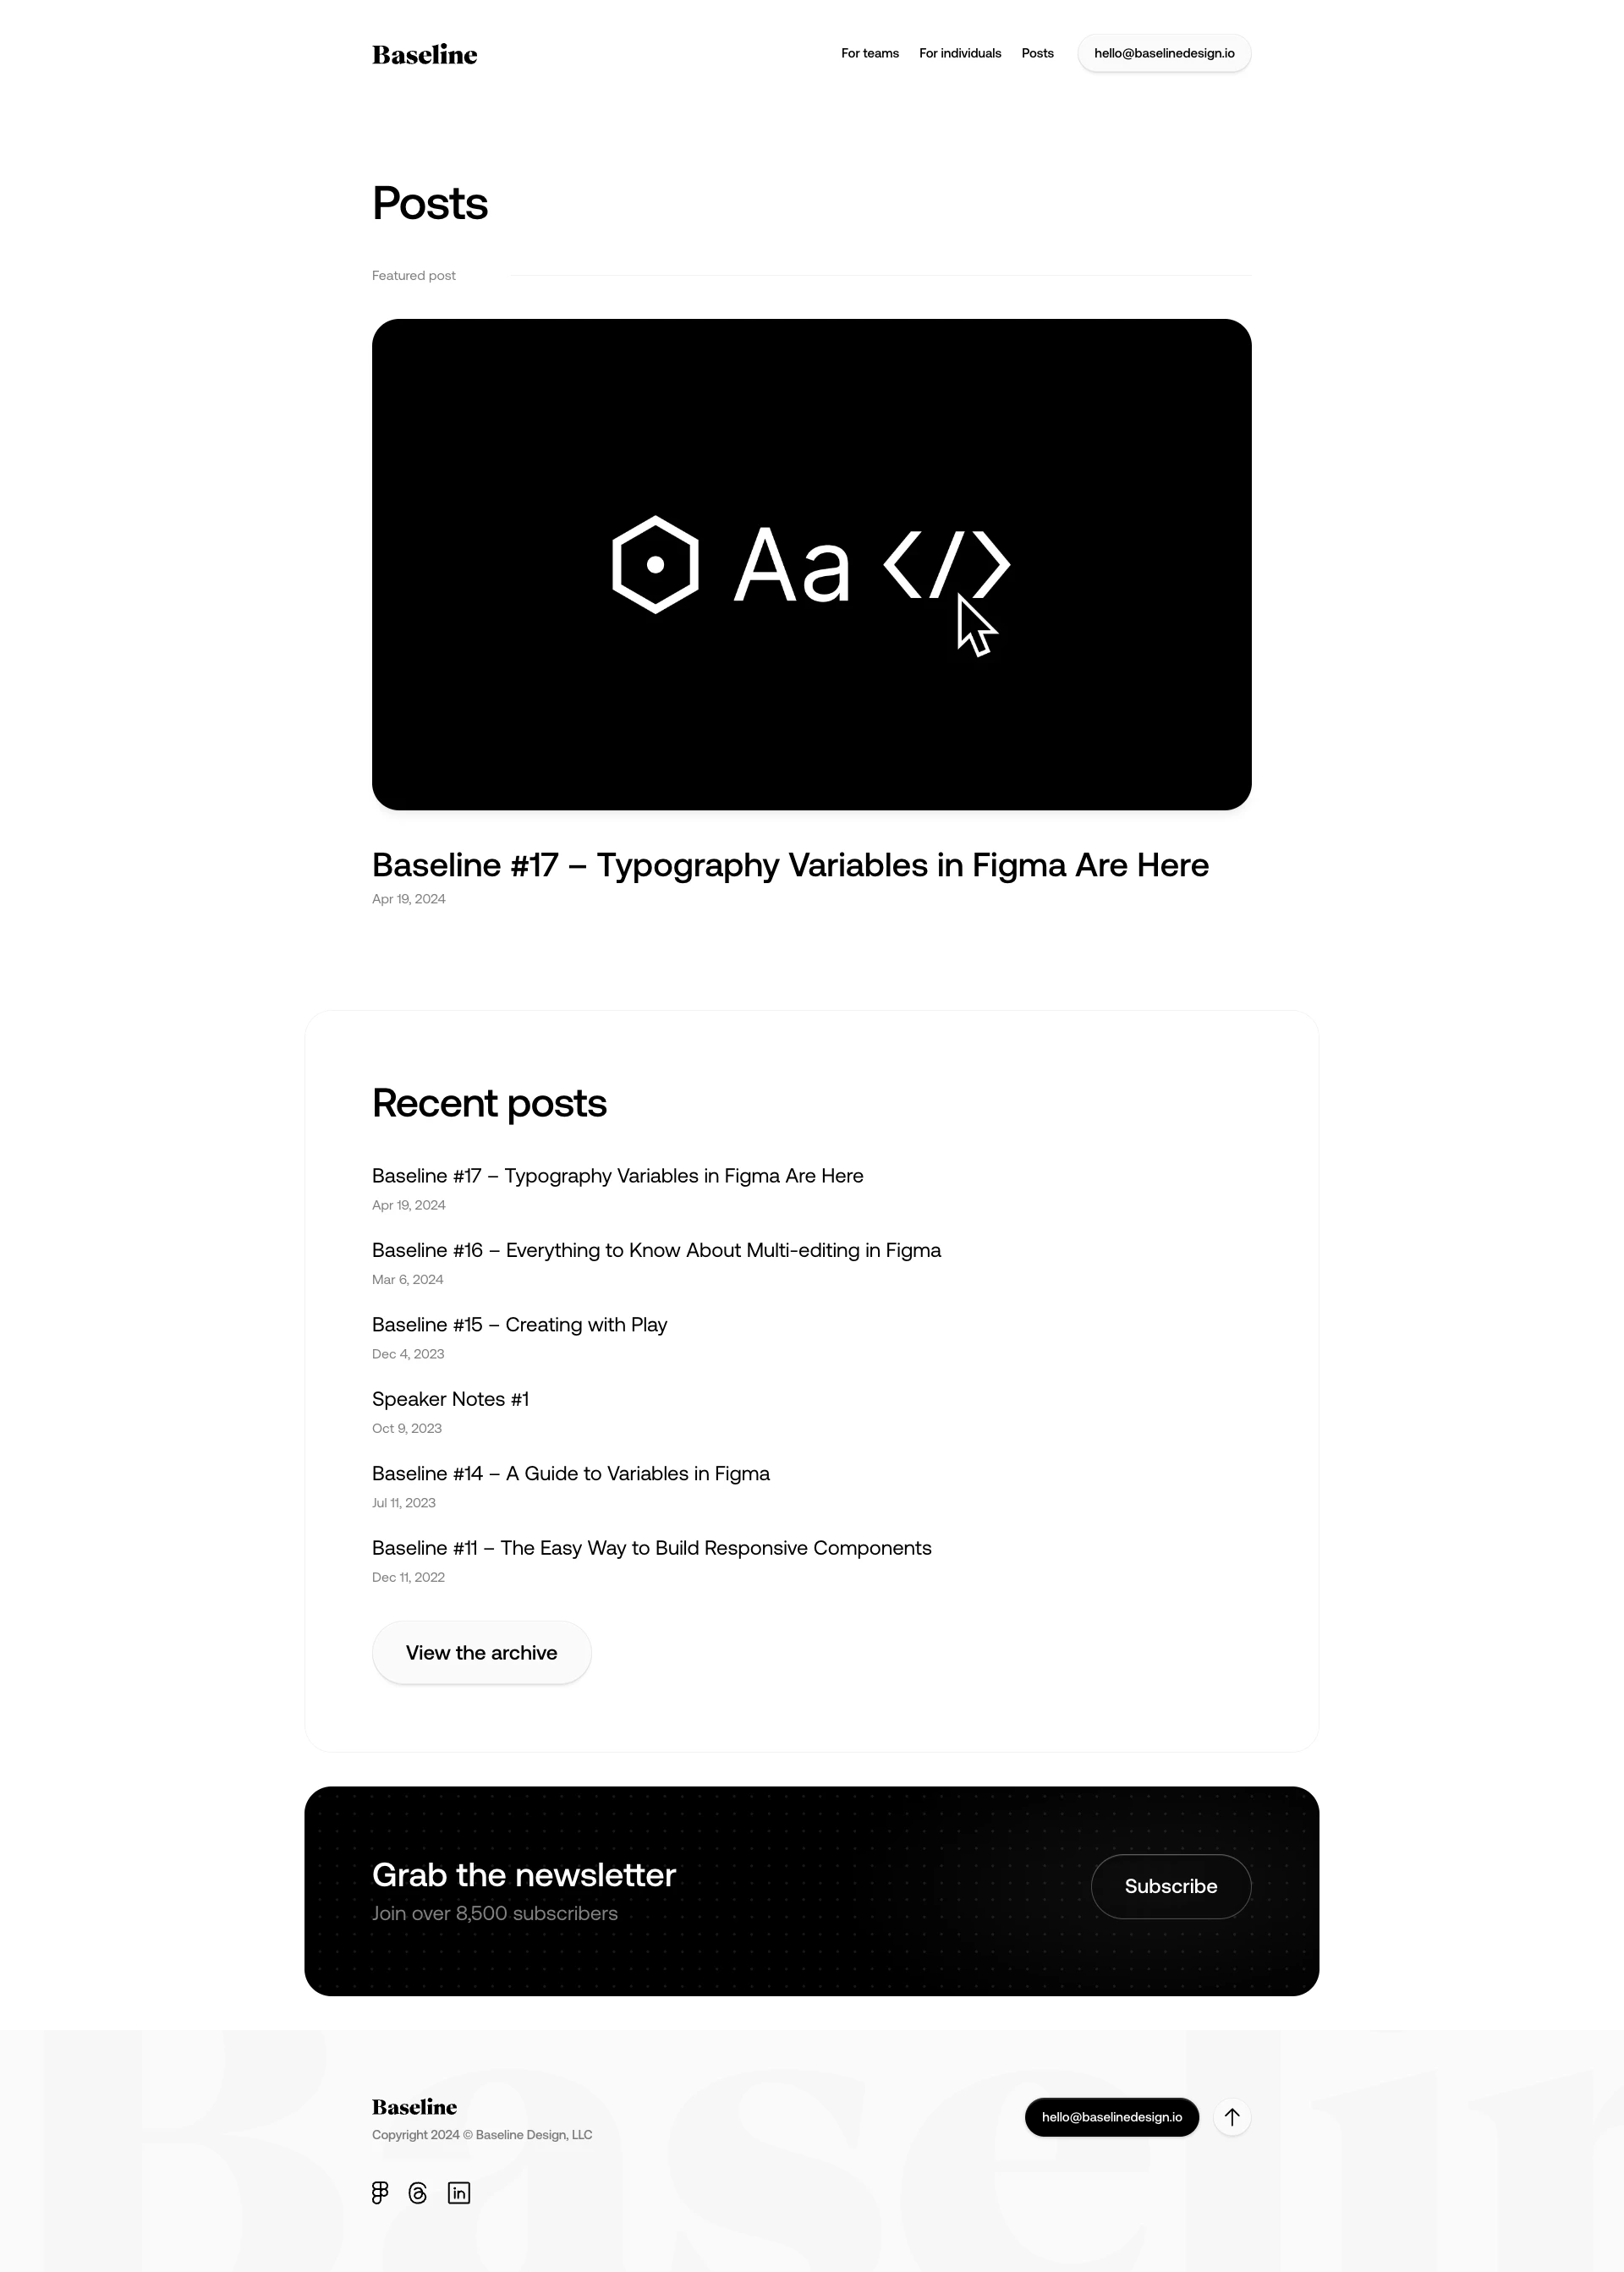 Baseline Design Landing Page Example: Personalized Figma and design system training, for individuals, teams, and companies.